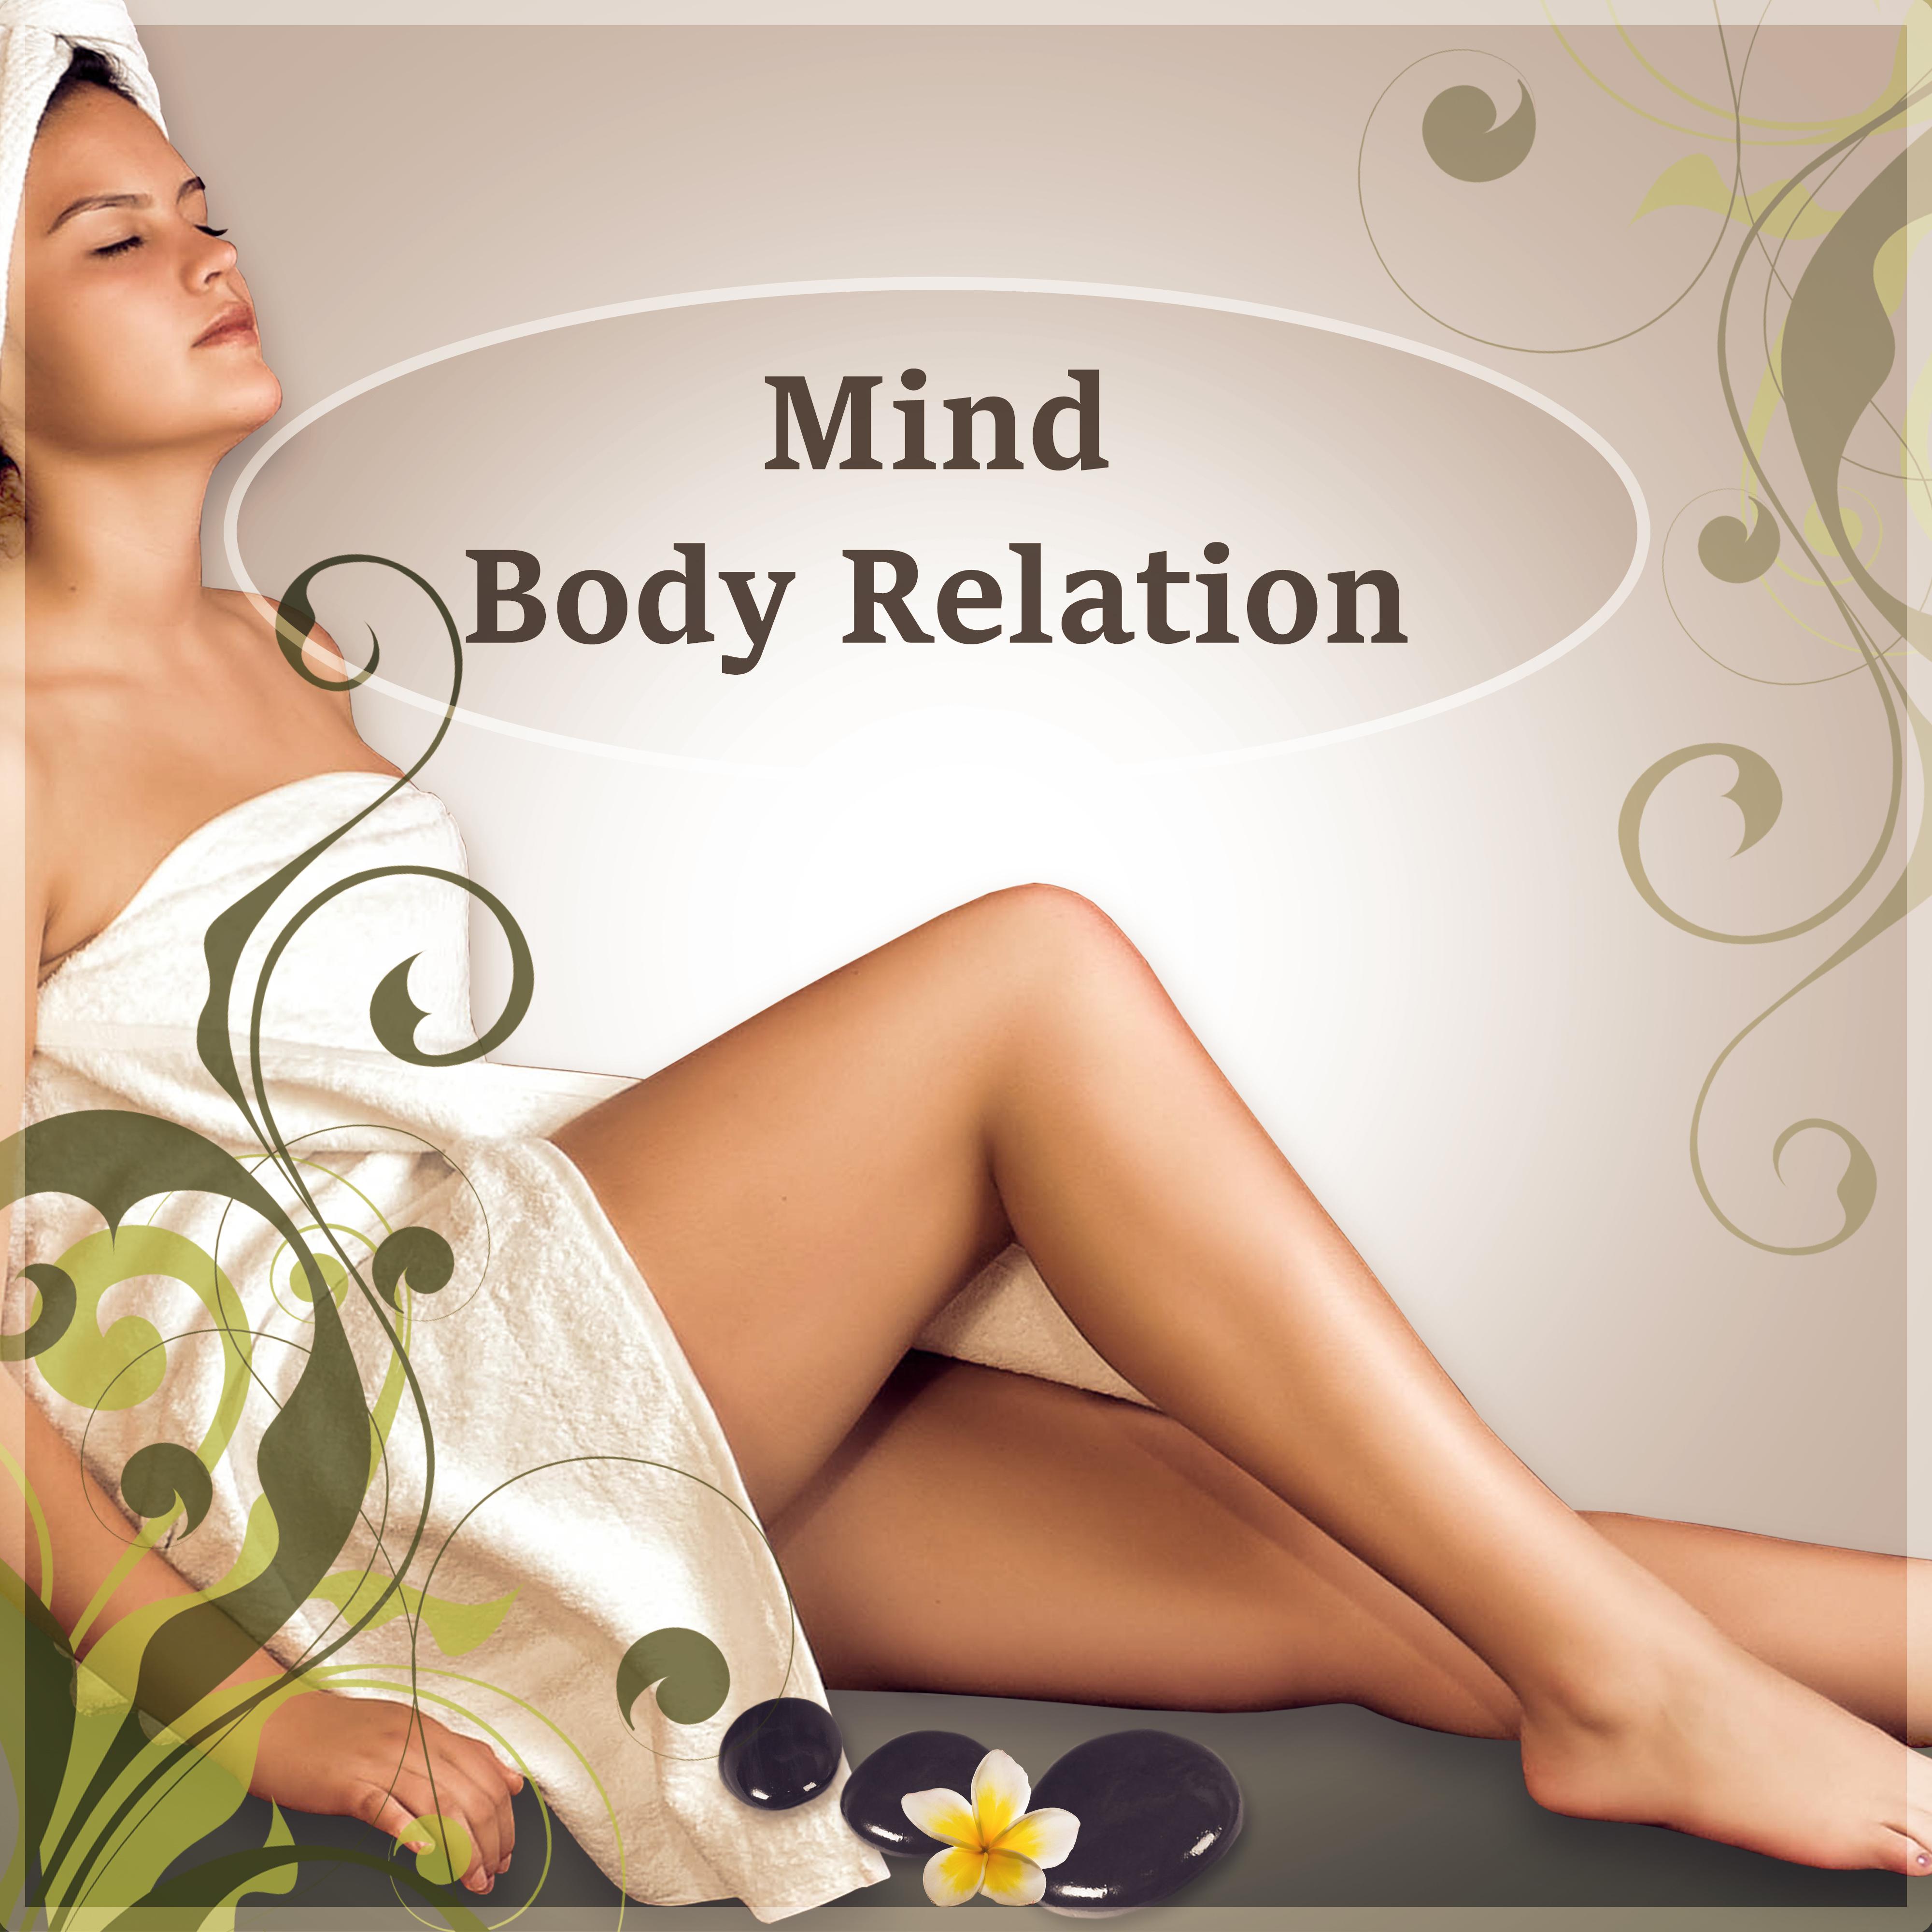 Mind Body Relation - Wellness, Pure Nature Sounds for Stress Relief, Harmony of Senses, Massage Music